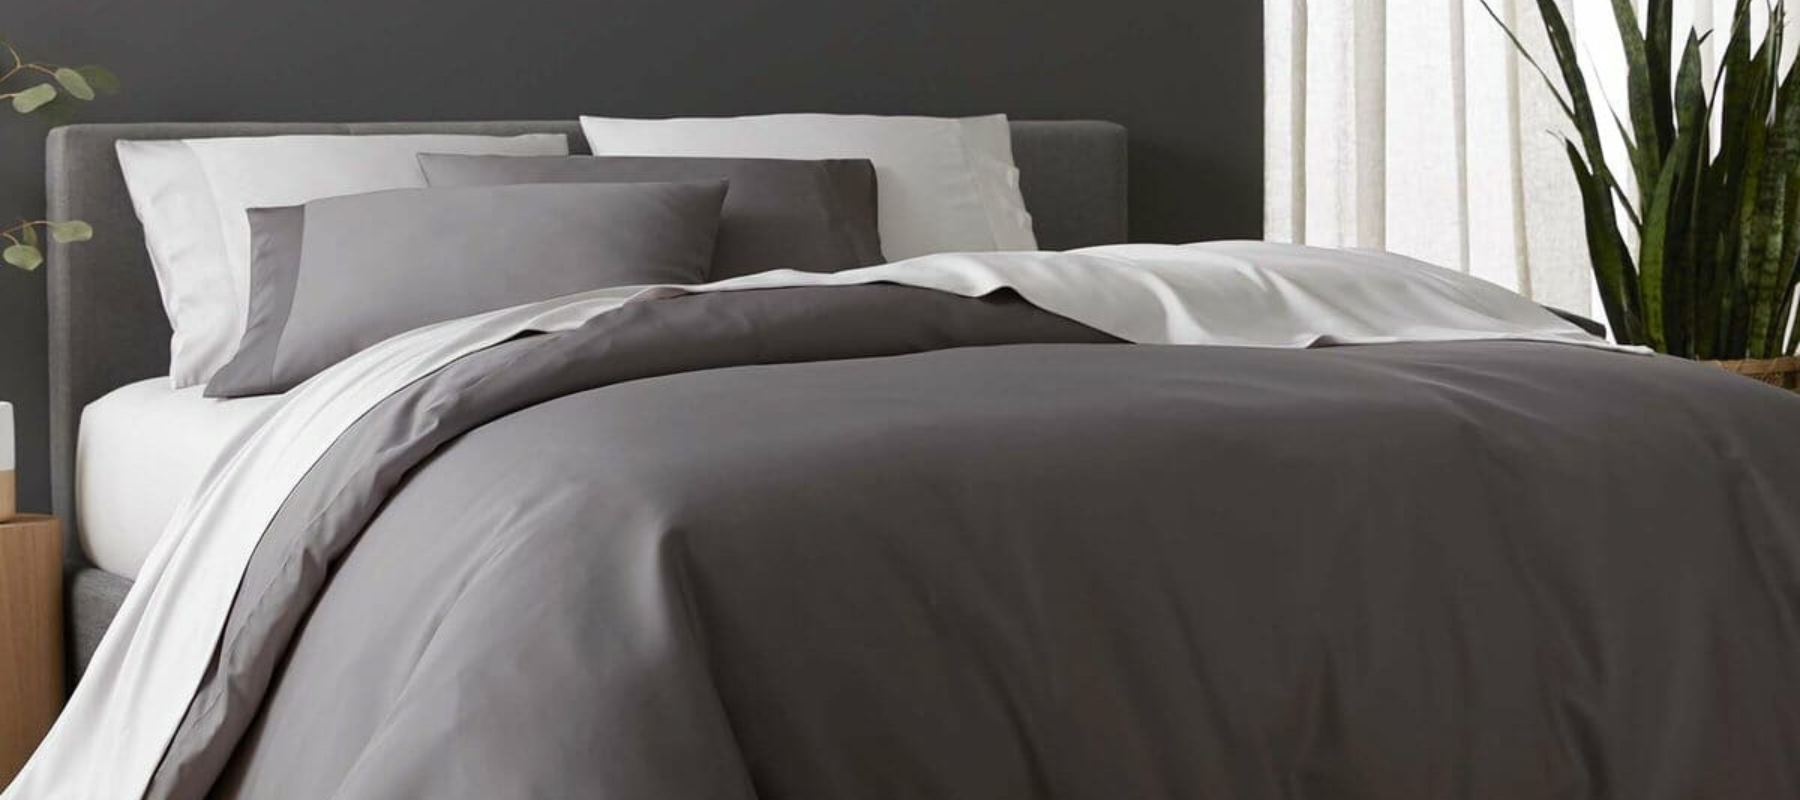 A 101 On Selecting The Most-Suitable Bed Sheet For Your Bedroom